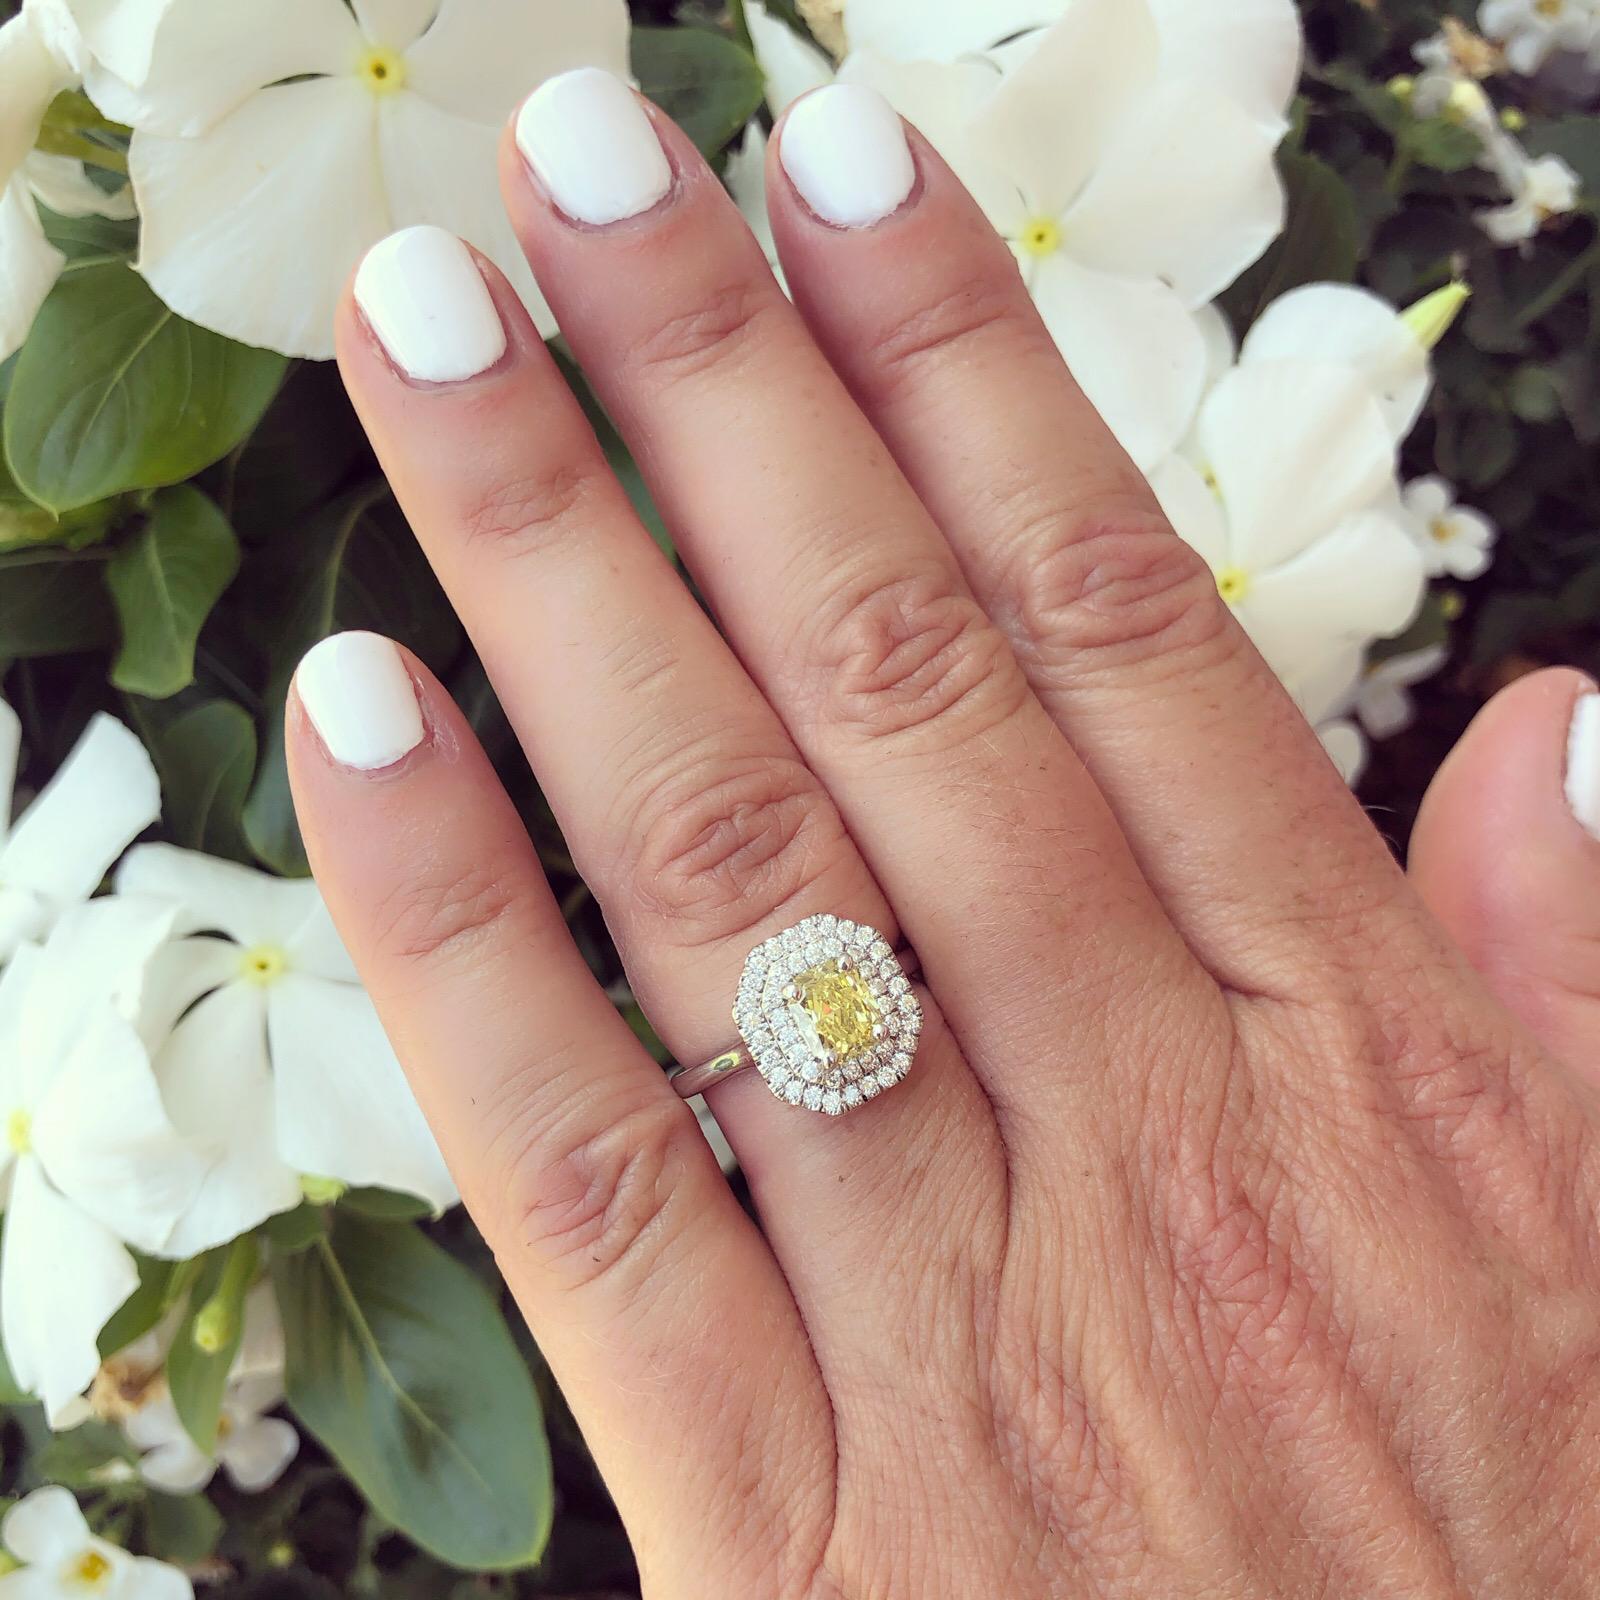 A contemporary and classic designed platinum ring, with a 1.01 carat GIA graded Fancy Intense Yellow/VVS1 radiant-cut diamond, even distribution, framed with a double halo of round brilliant-cut diamonds. Total diamond weight is 1.46 carats. The